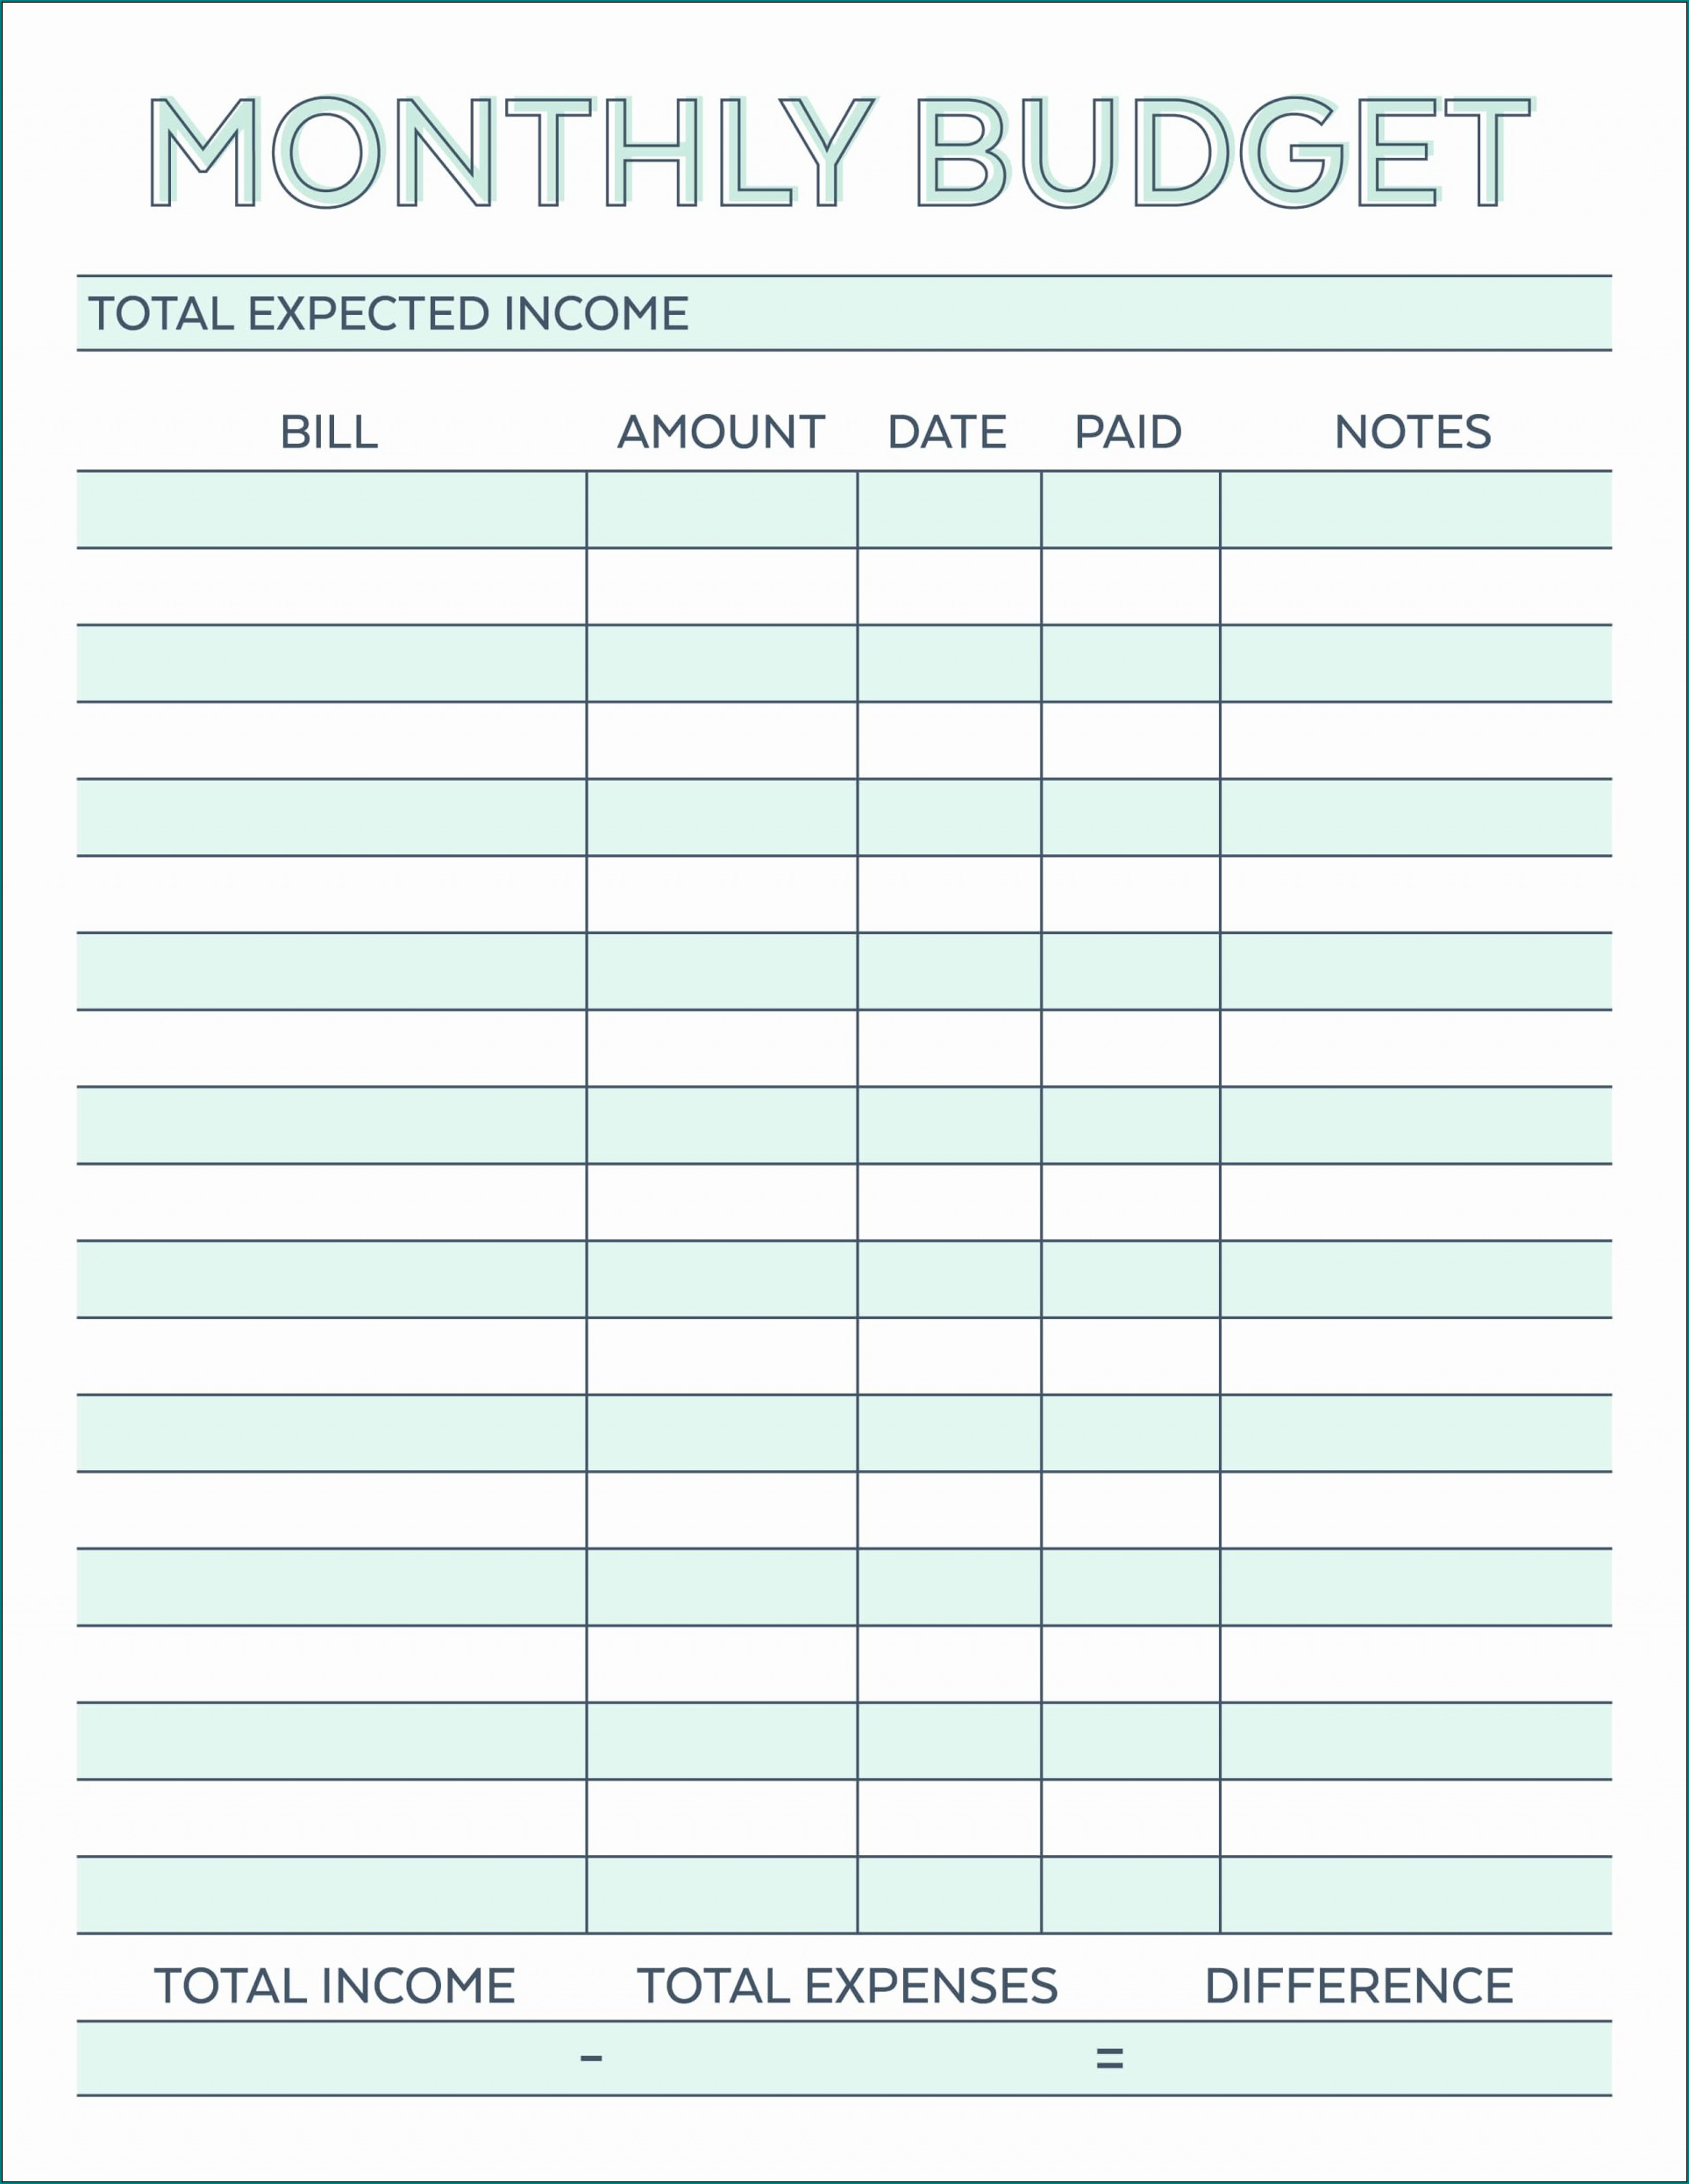 Example of Monthly Budget Template